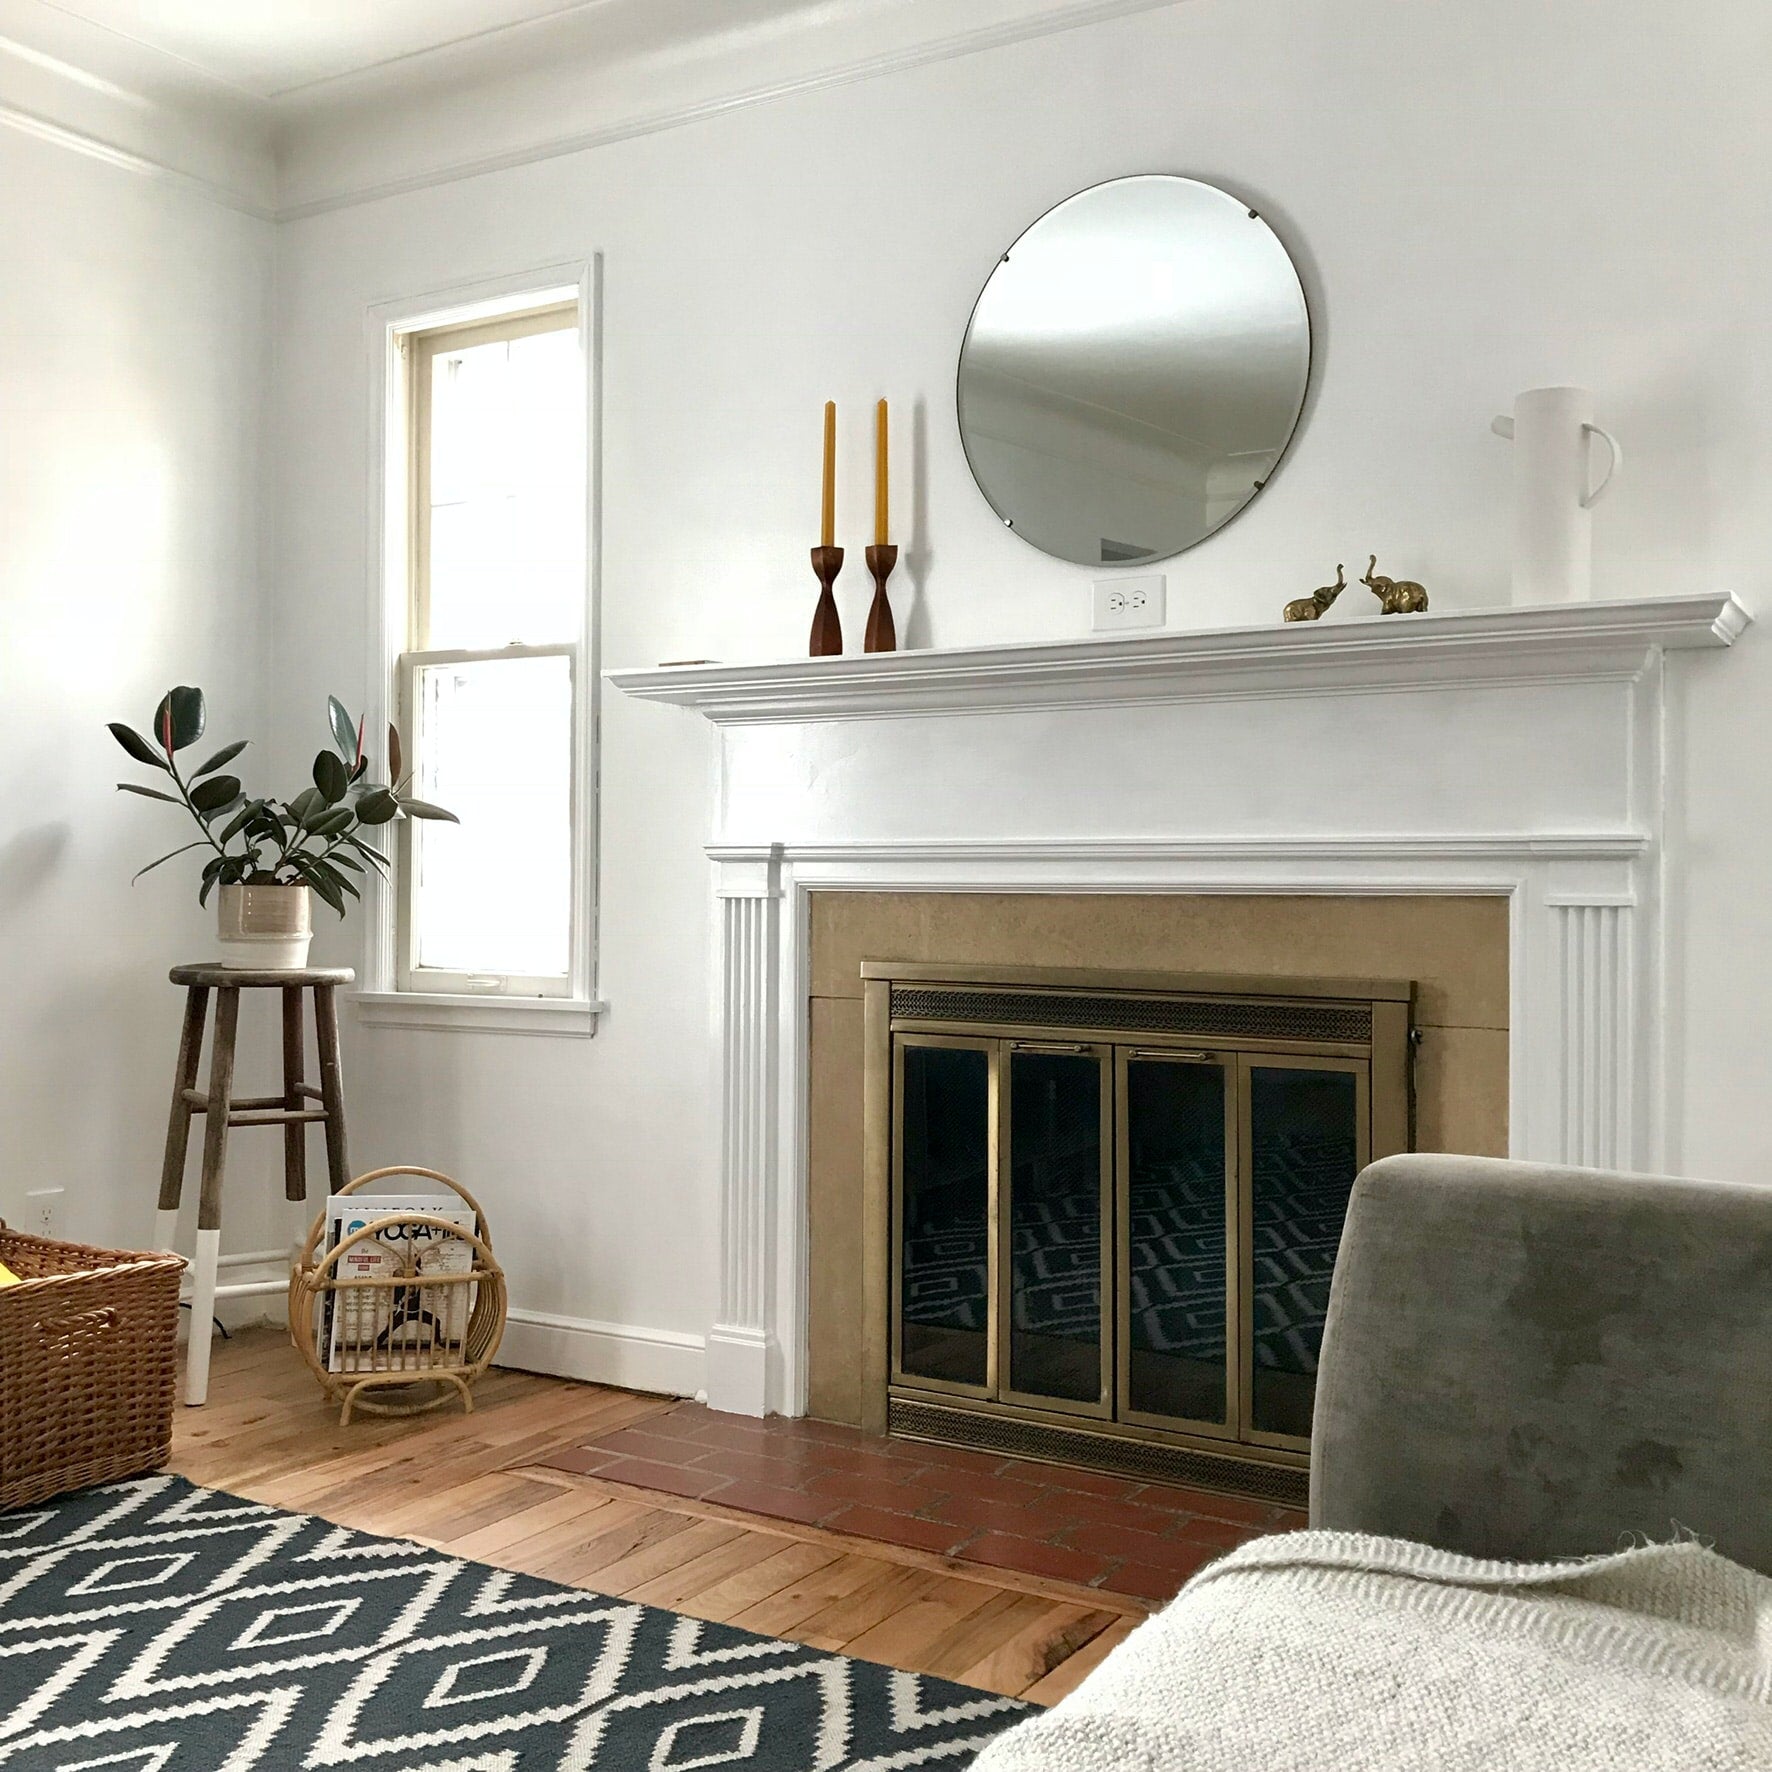 How to style your fireplace